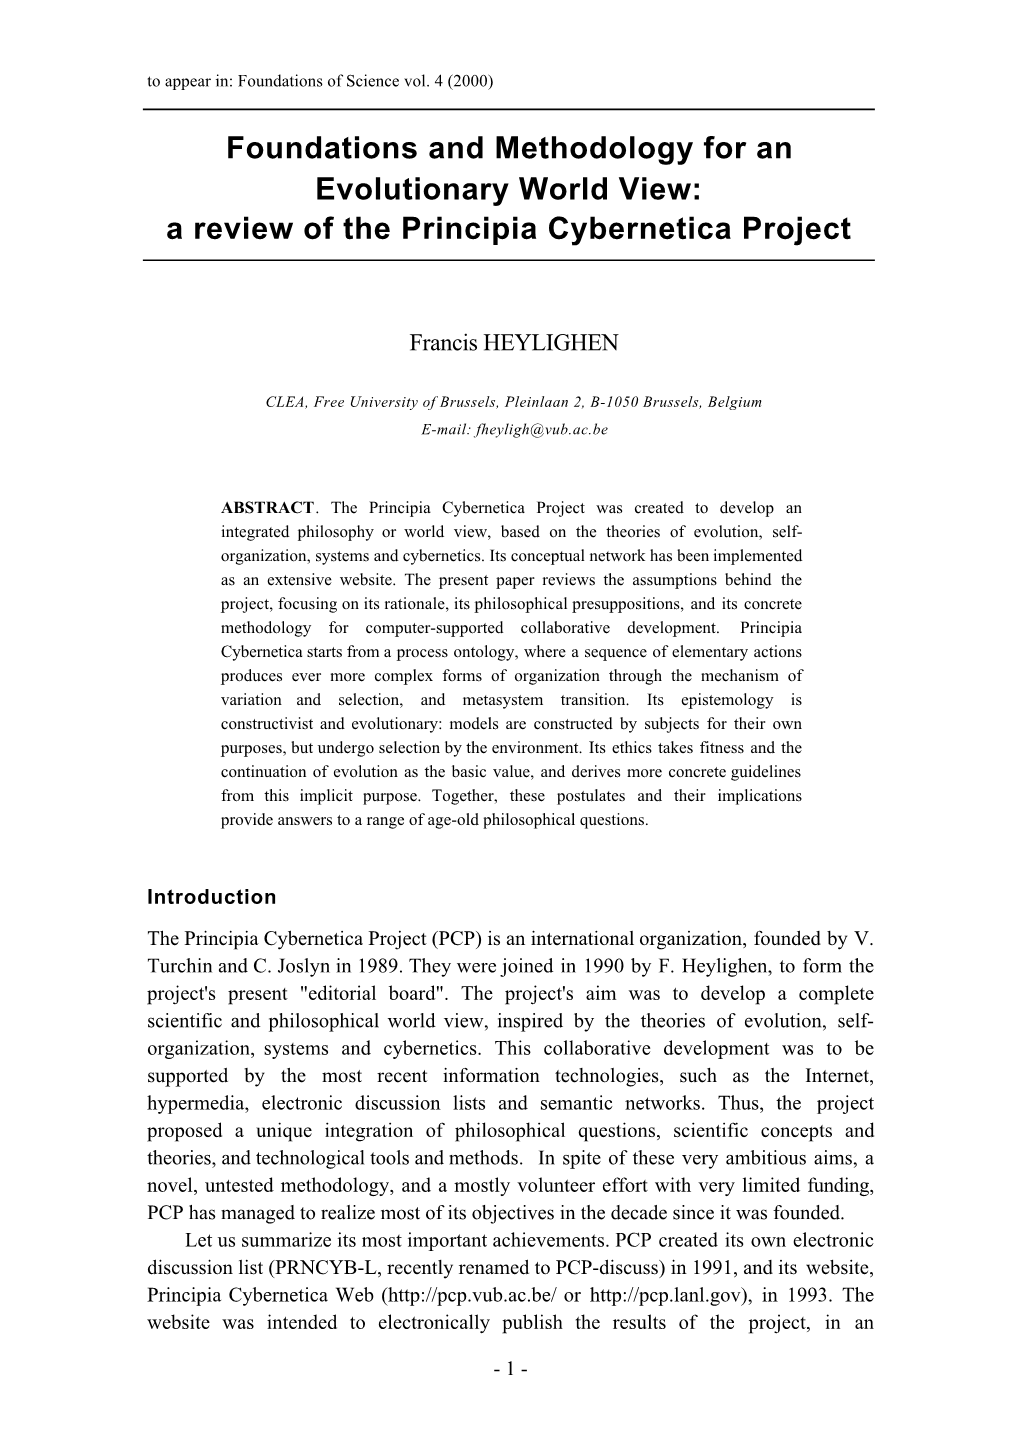 Foundations and Methodology for an Evolutionary World View: a Review of the Principia Cybernetica Project